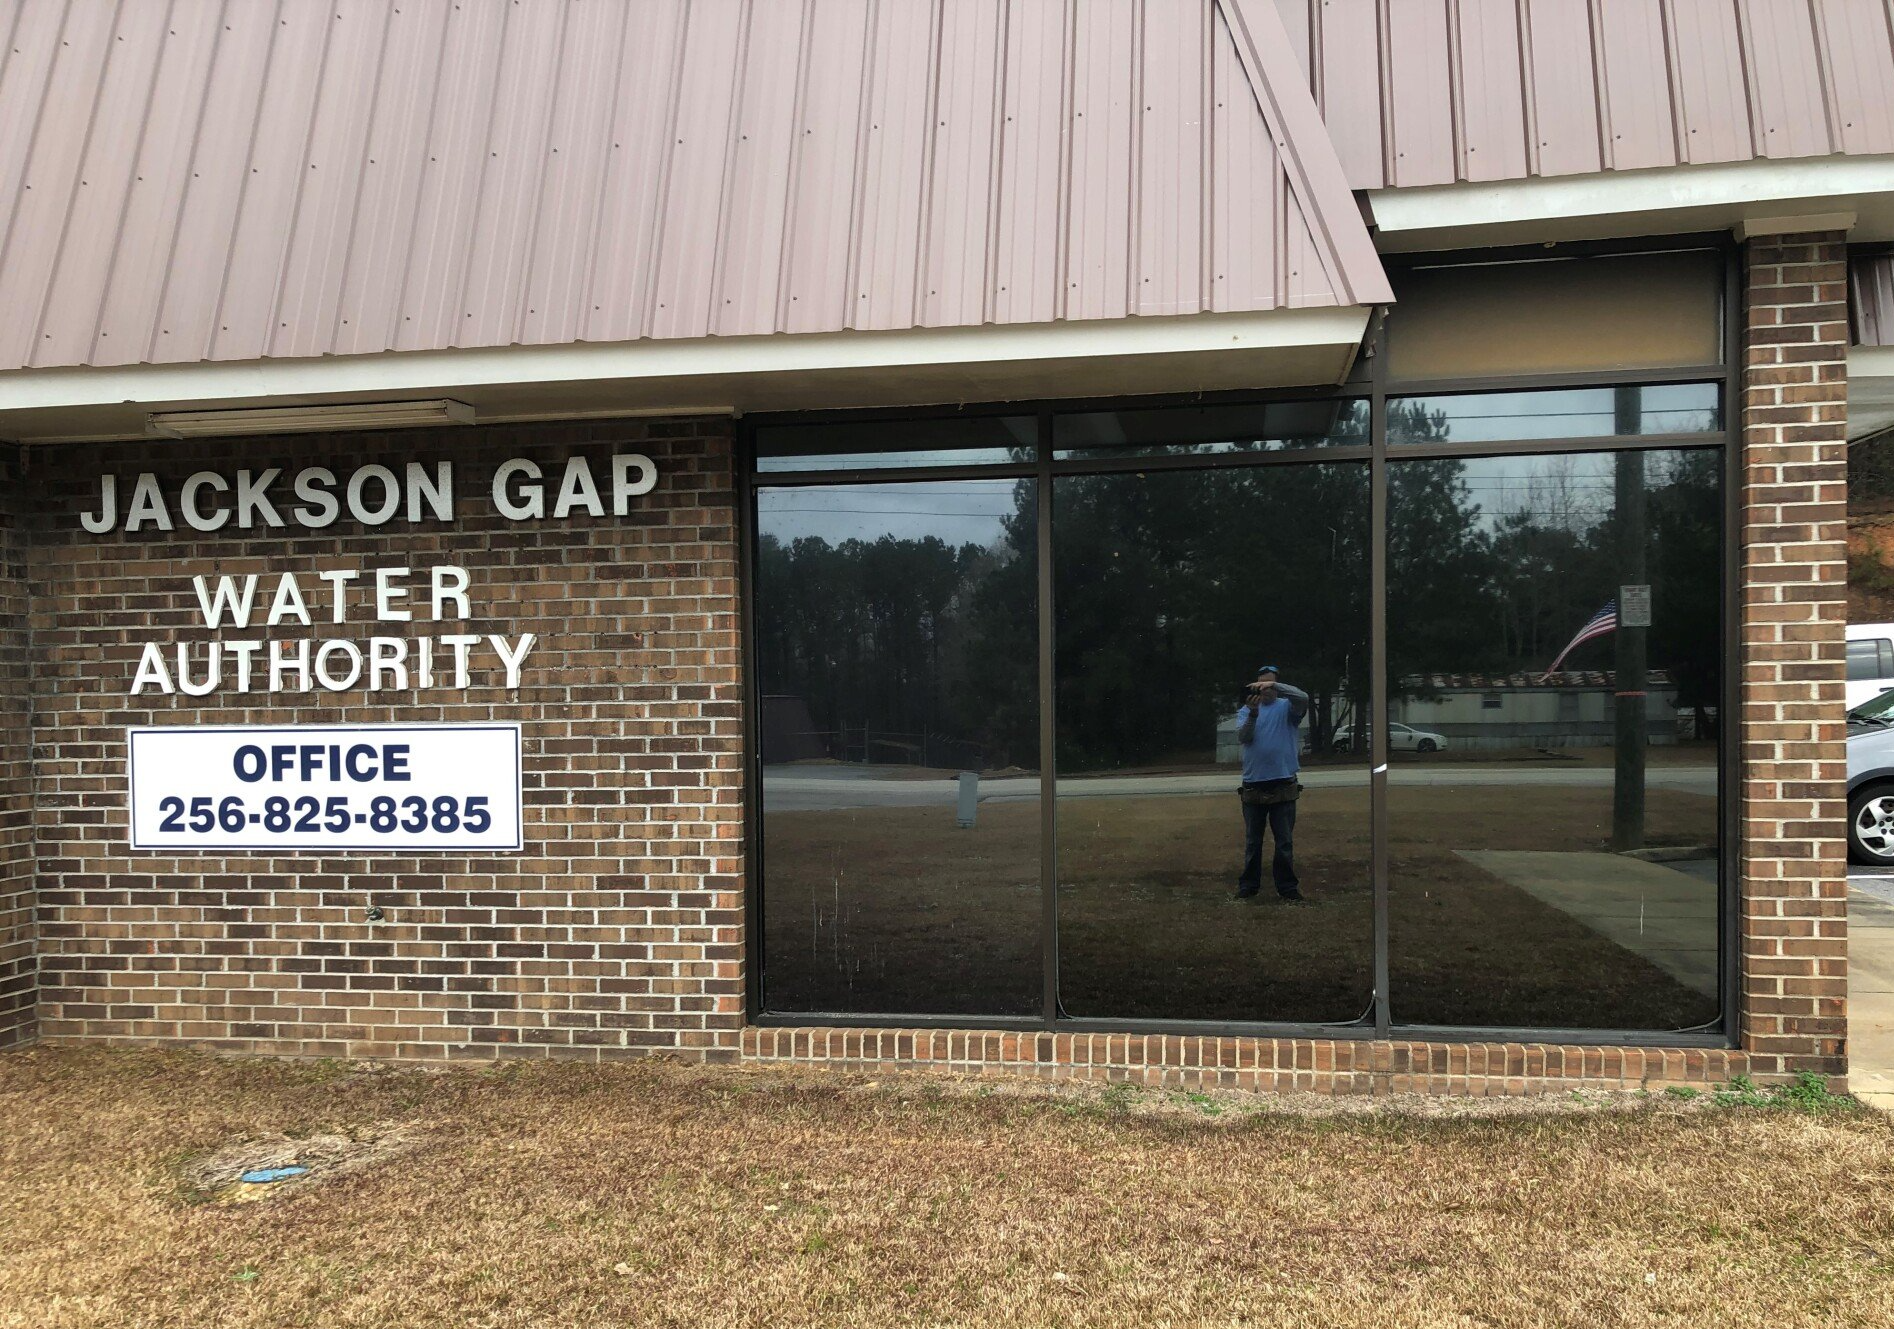 window tinting service at Lake Martin in Jacksons Gap - Now OVER 90% Heat & Glare has been eliminated after SPF Performance Tint installed to the office windows and door.